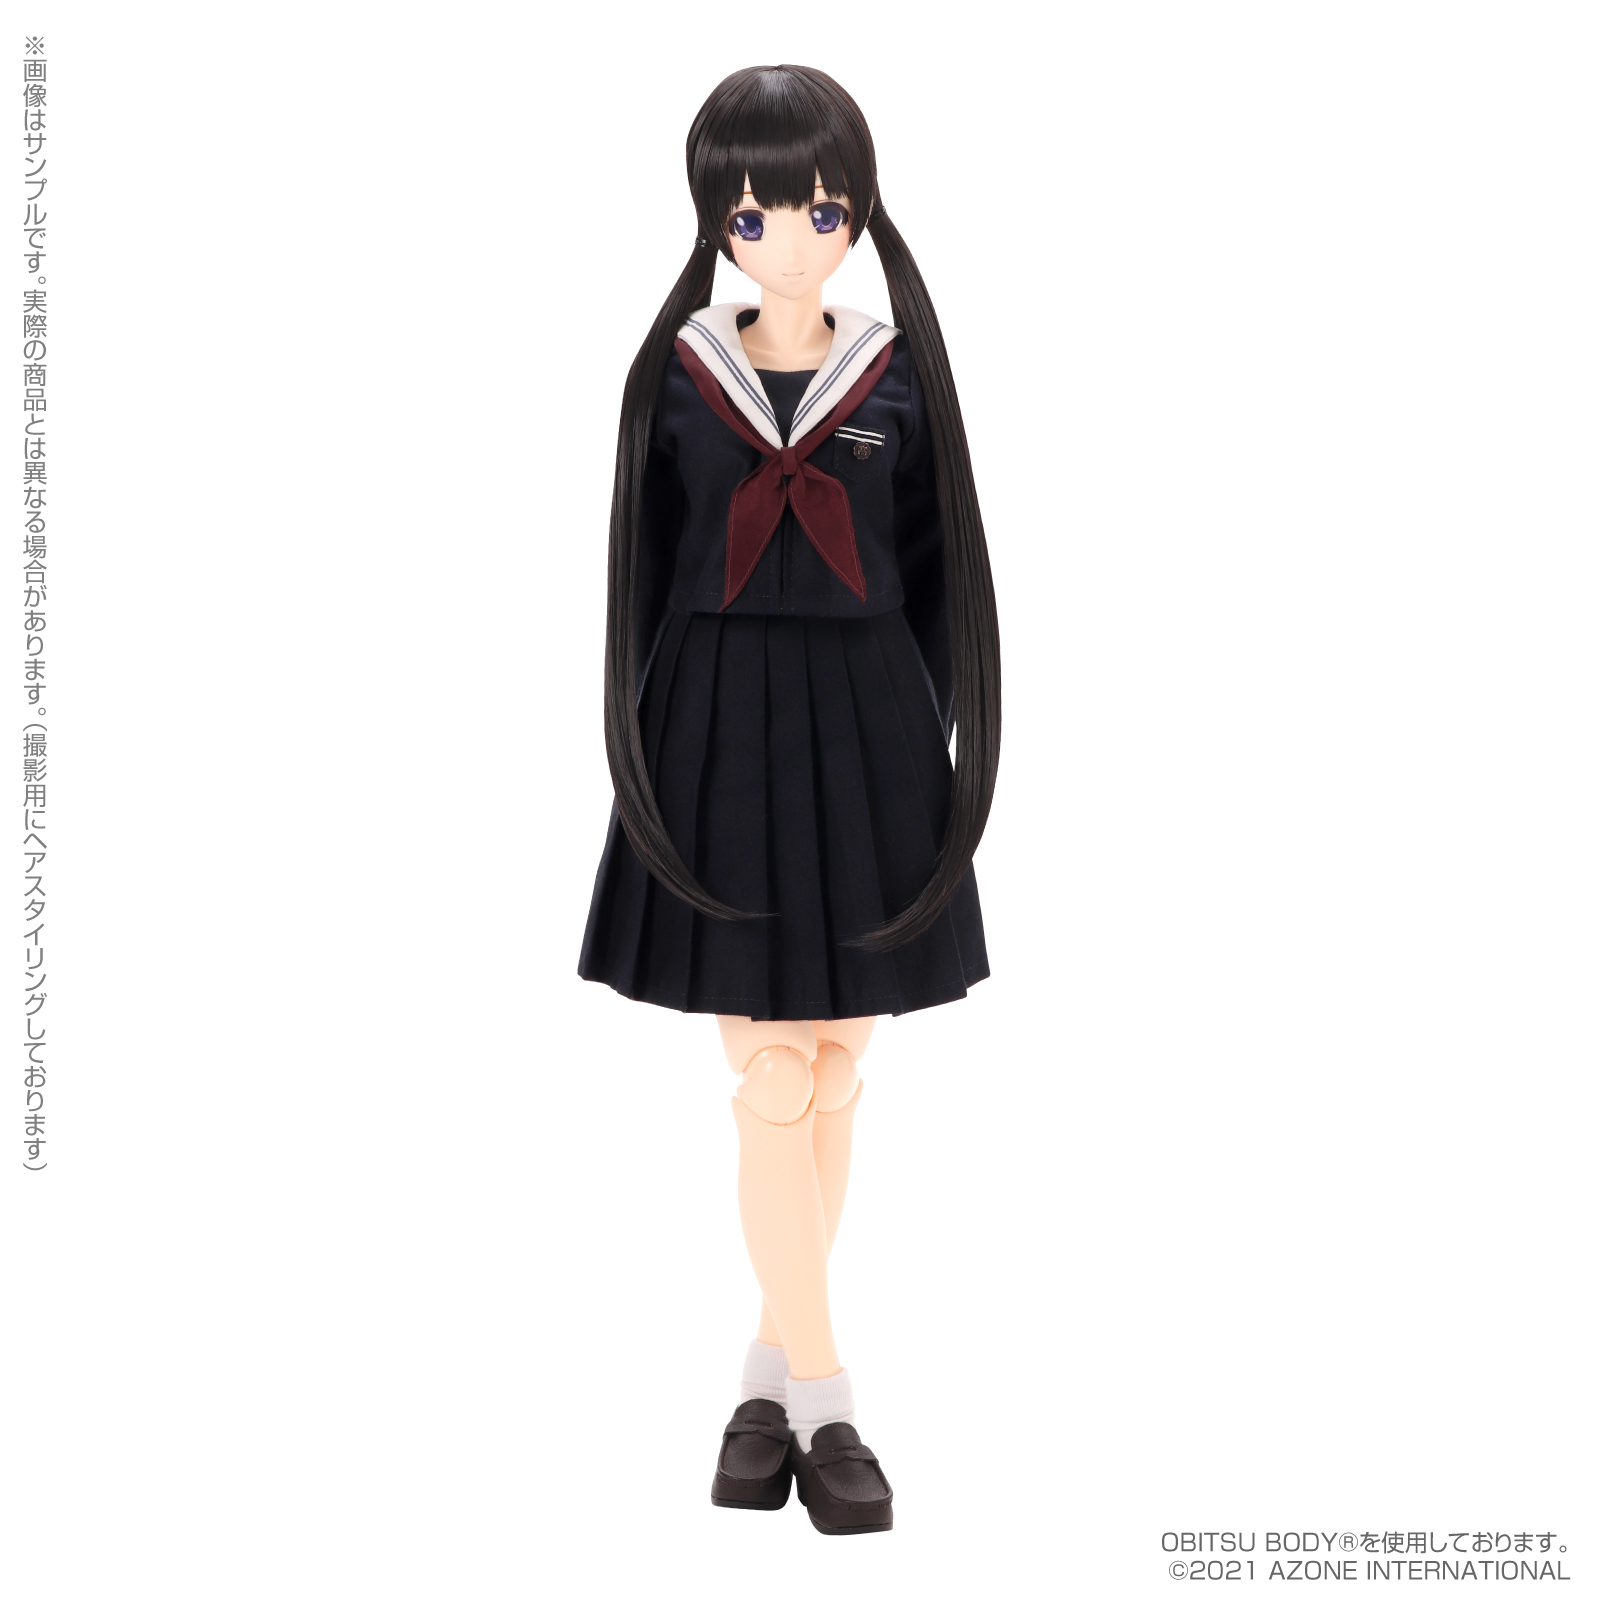 Happiness Clover 和遥キナ学校制服コレクション『和遥清心女子学園ver./まひろ』ハピネスクローバー 1/3 完成品ドール-004